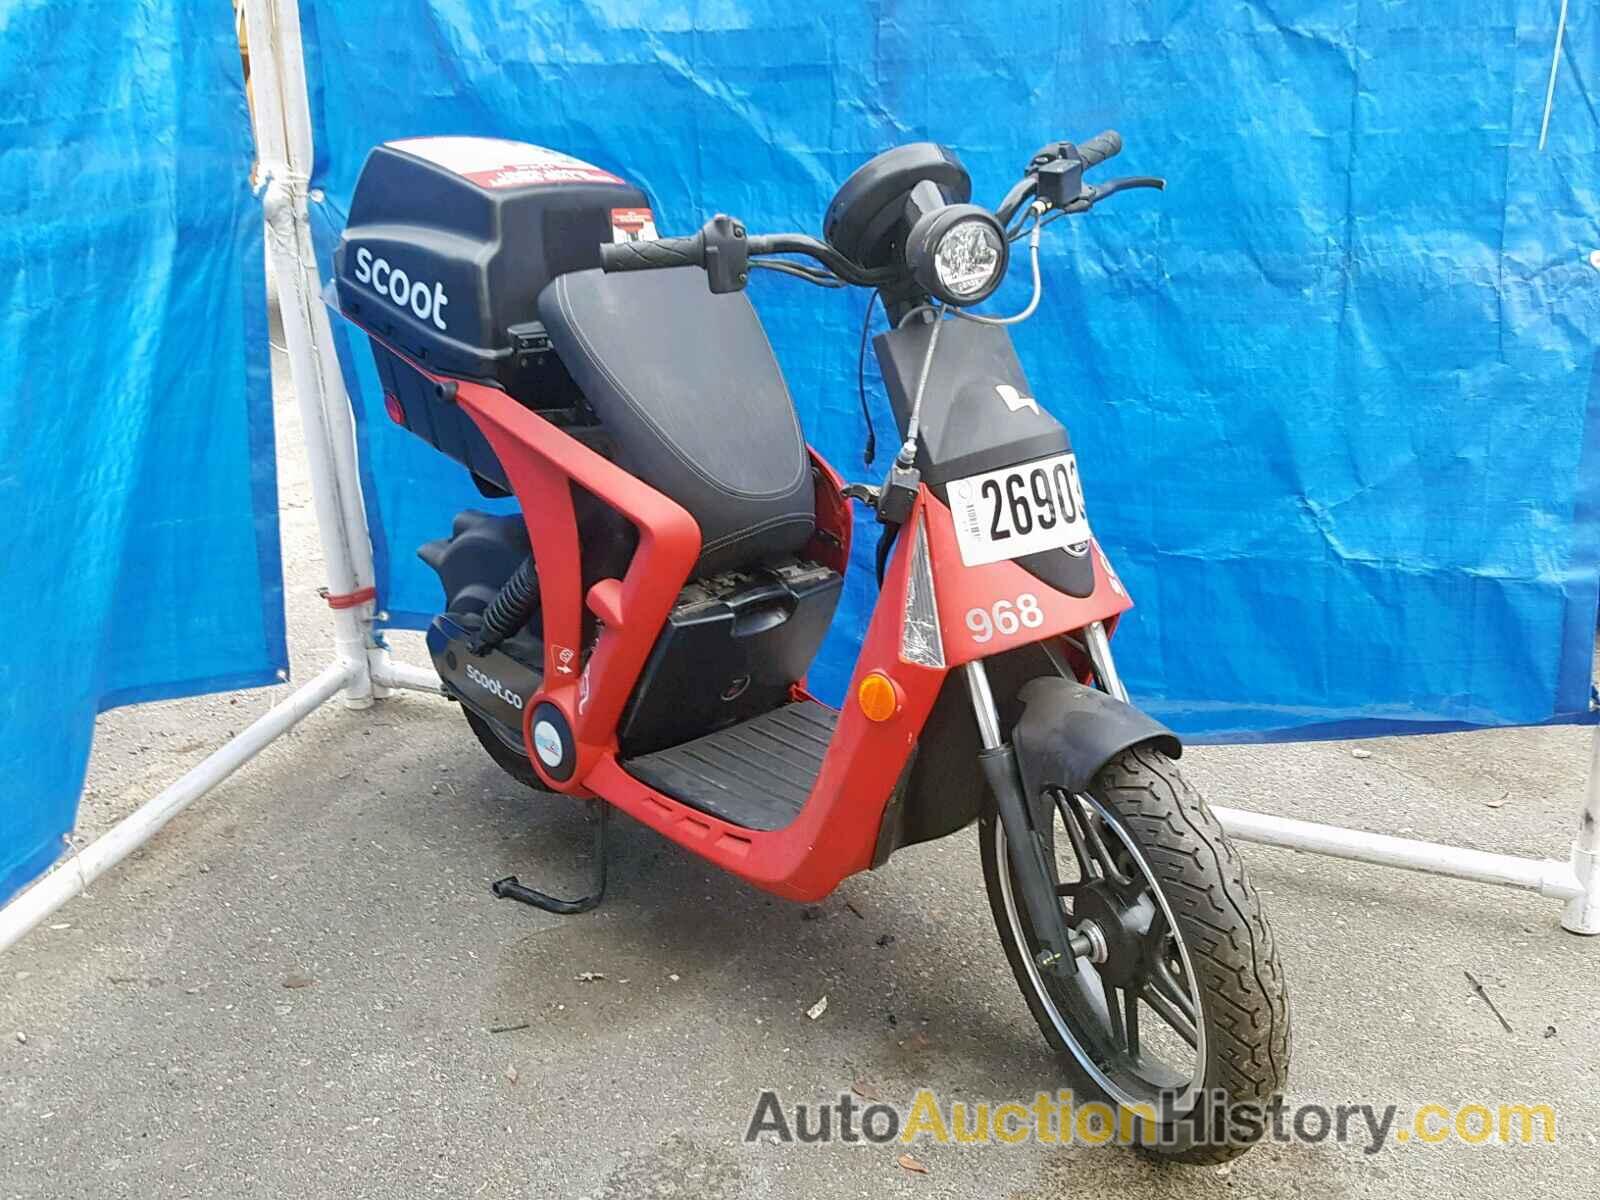 2016 OTHER SCOOTER, 58DGS4116GAV00845